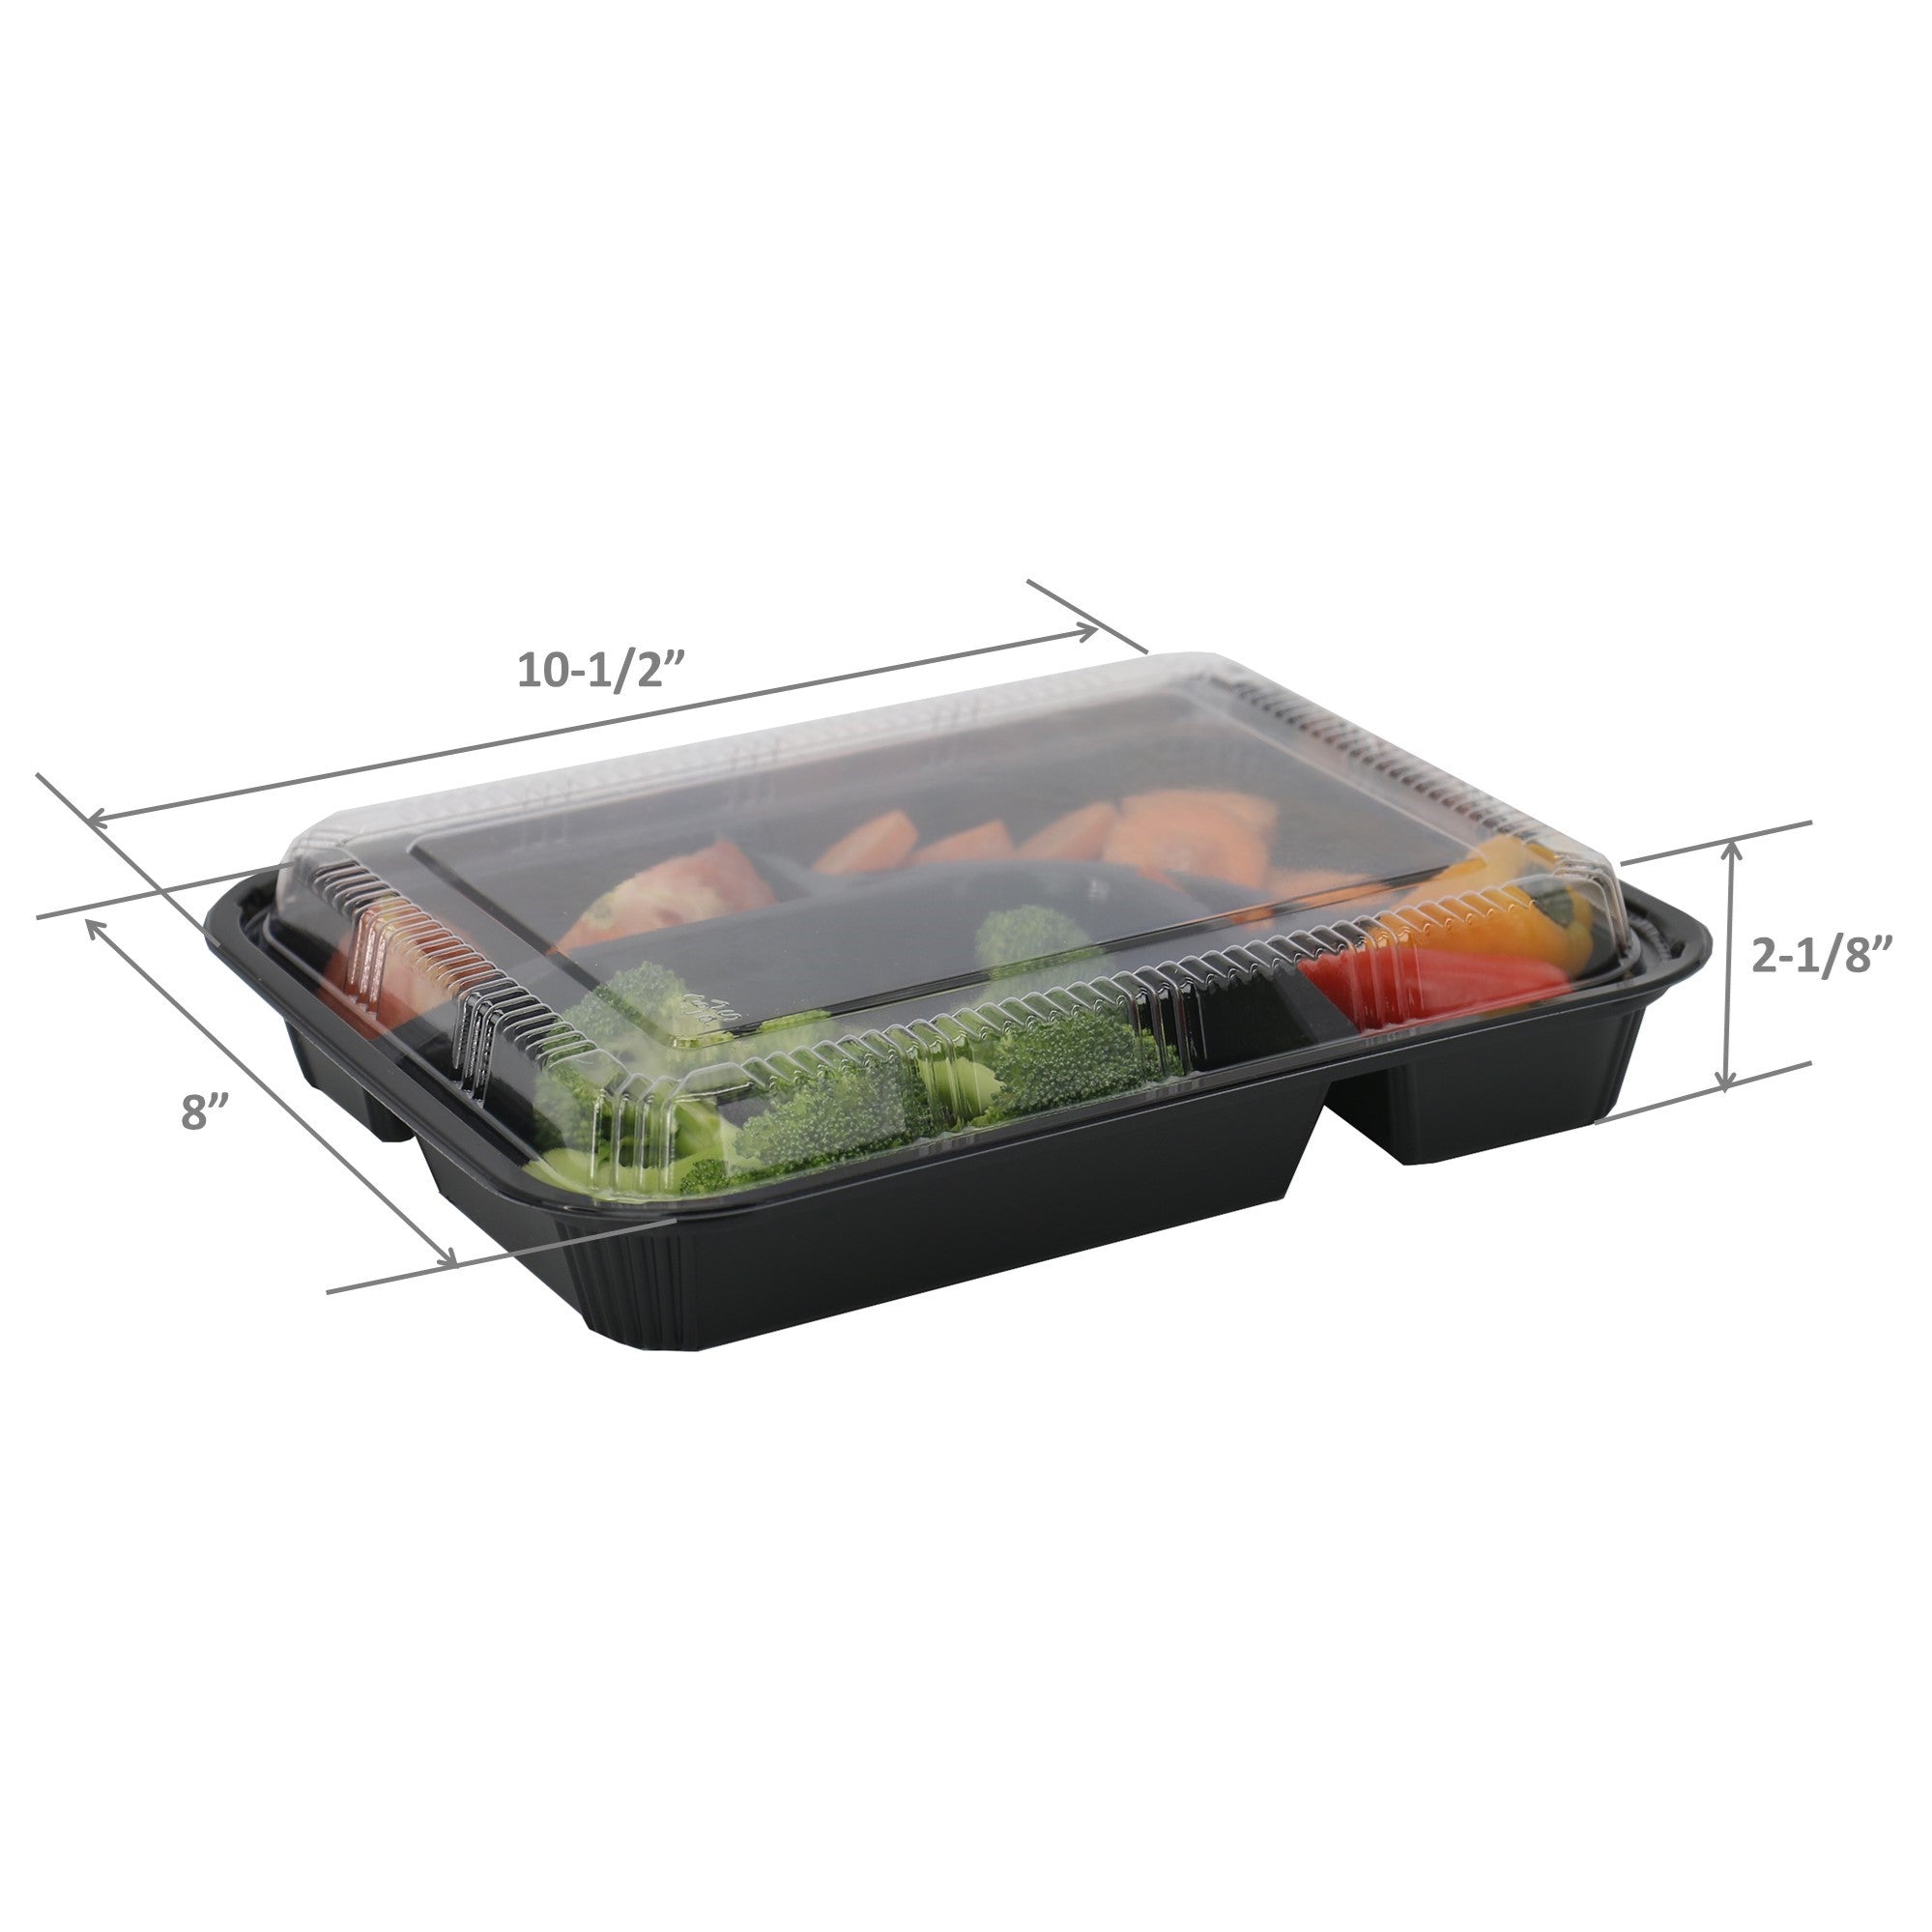 5-Compartment Food Containers  Bento-style Meal Containers